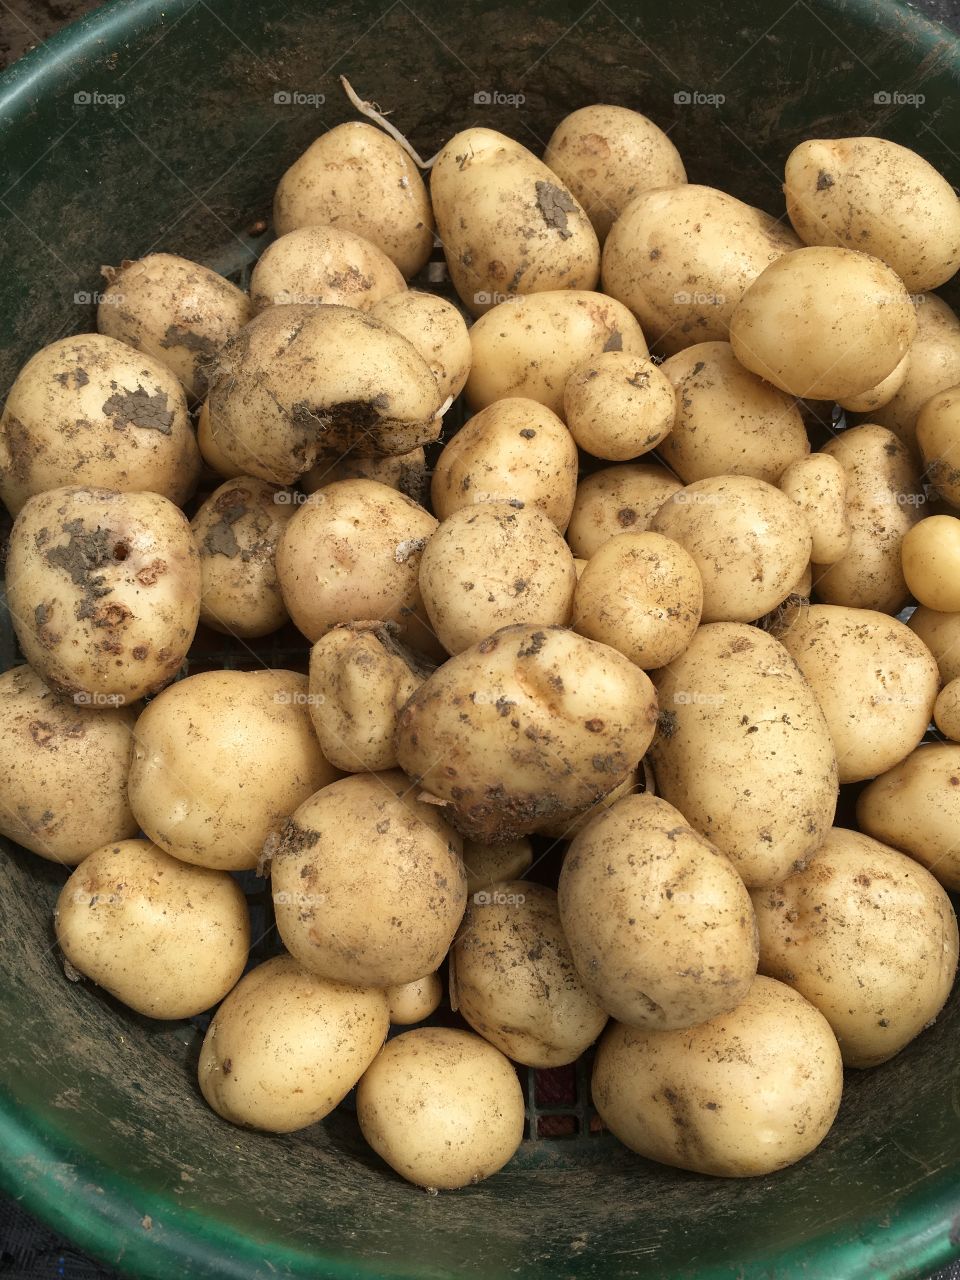 Potatoes from the allotment 